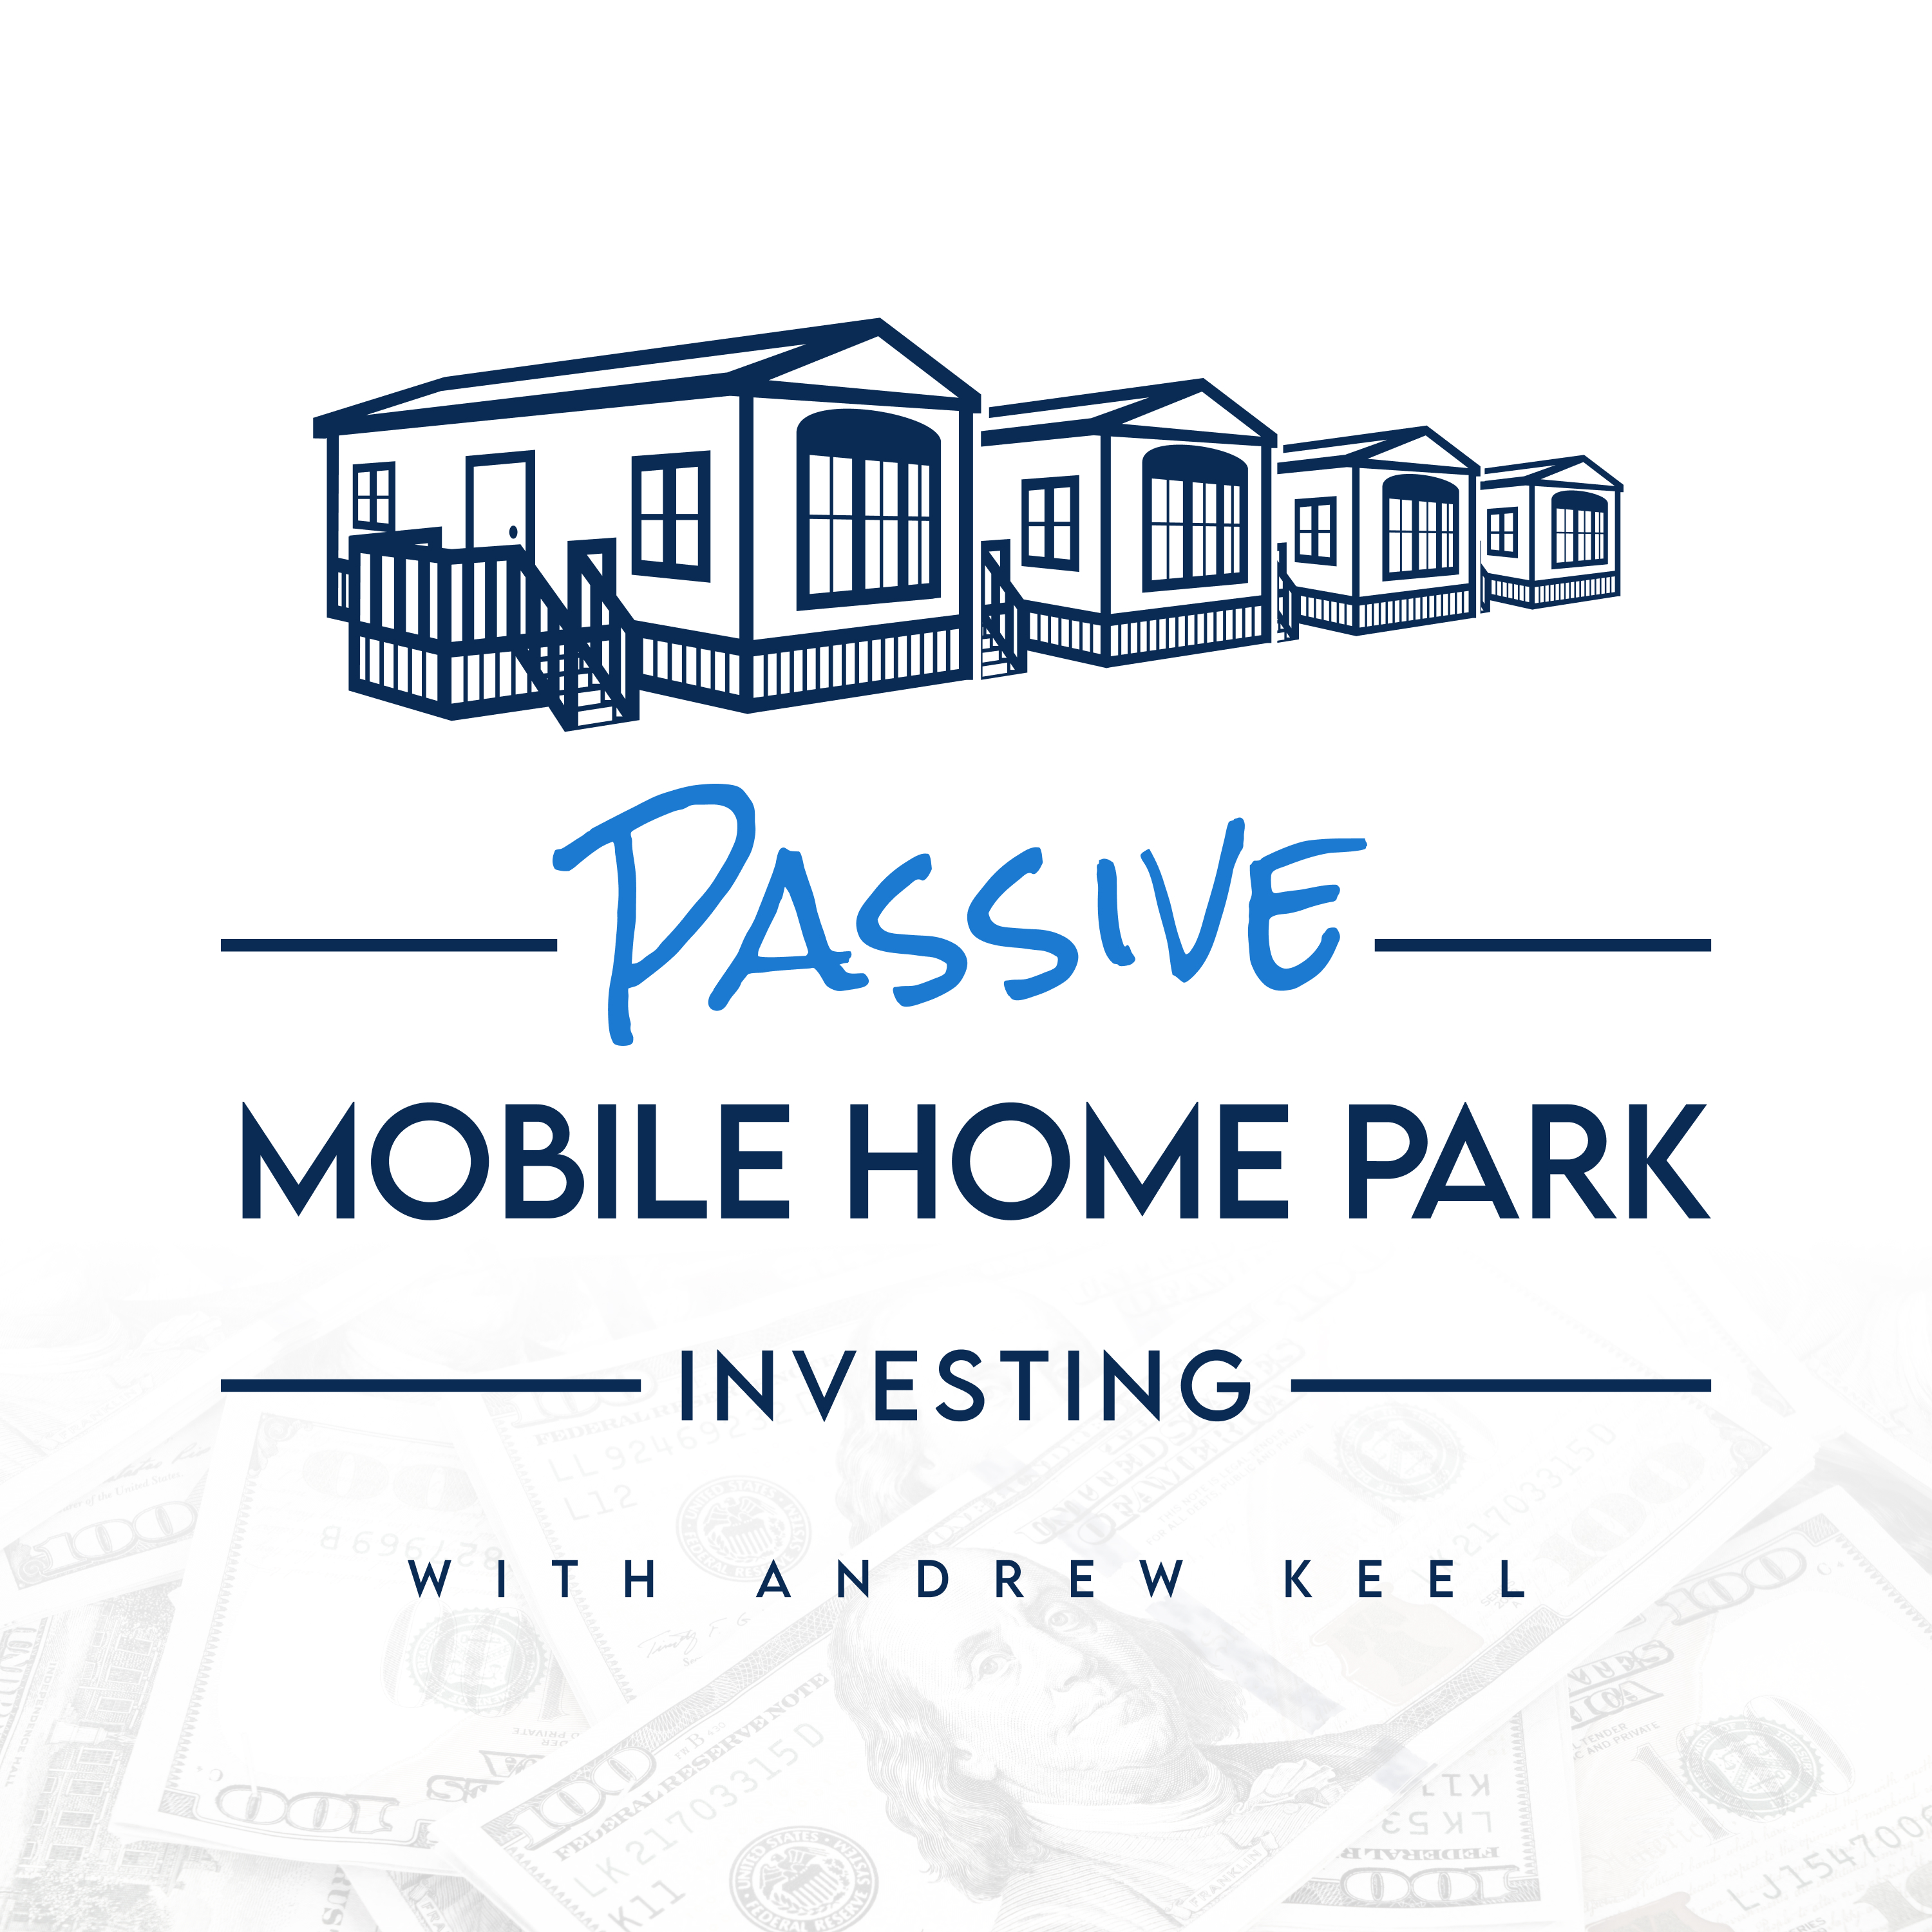 Mobile Home Parks Have Attractive Financing Options